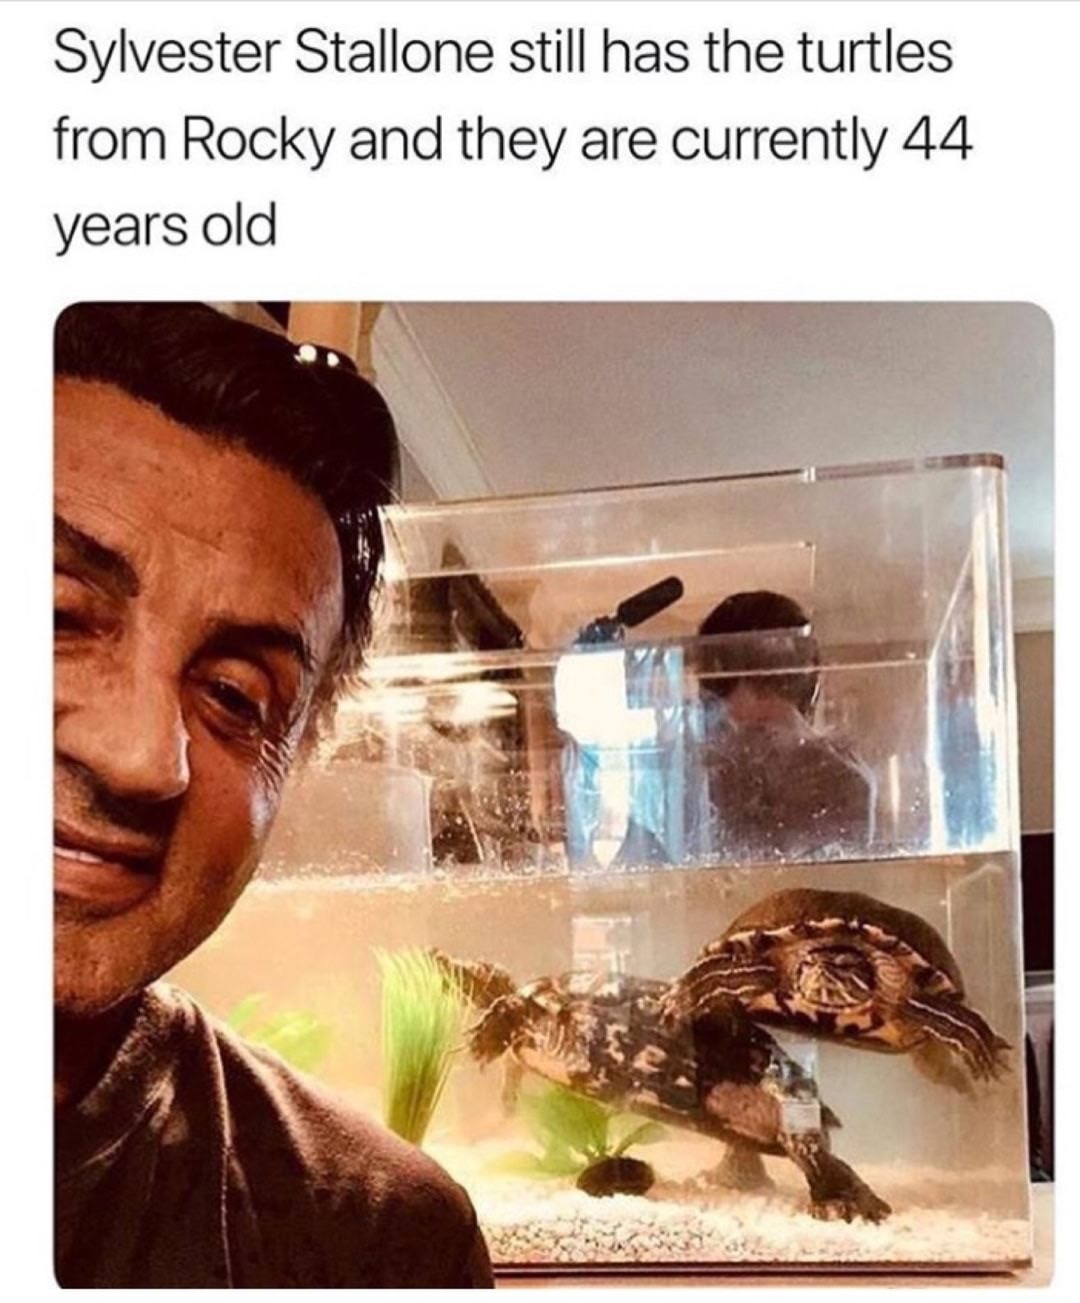 sylvester stallone posing with the turtles from Rocky that are still alive 44 years later